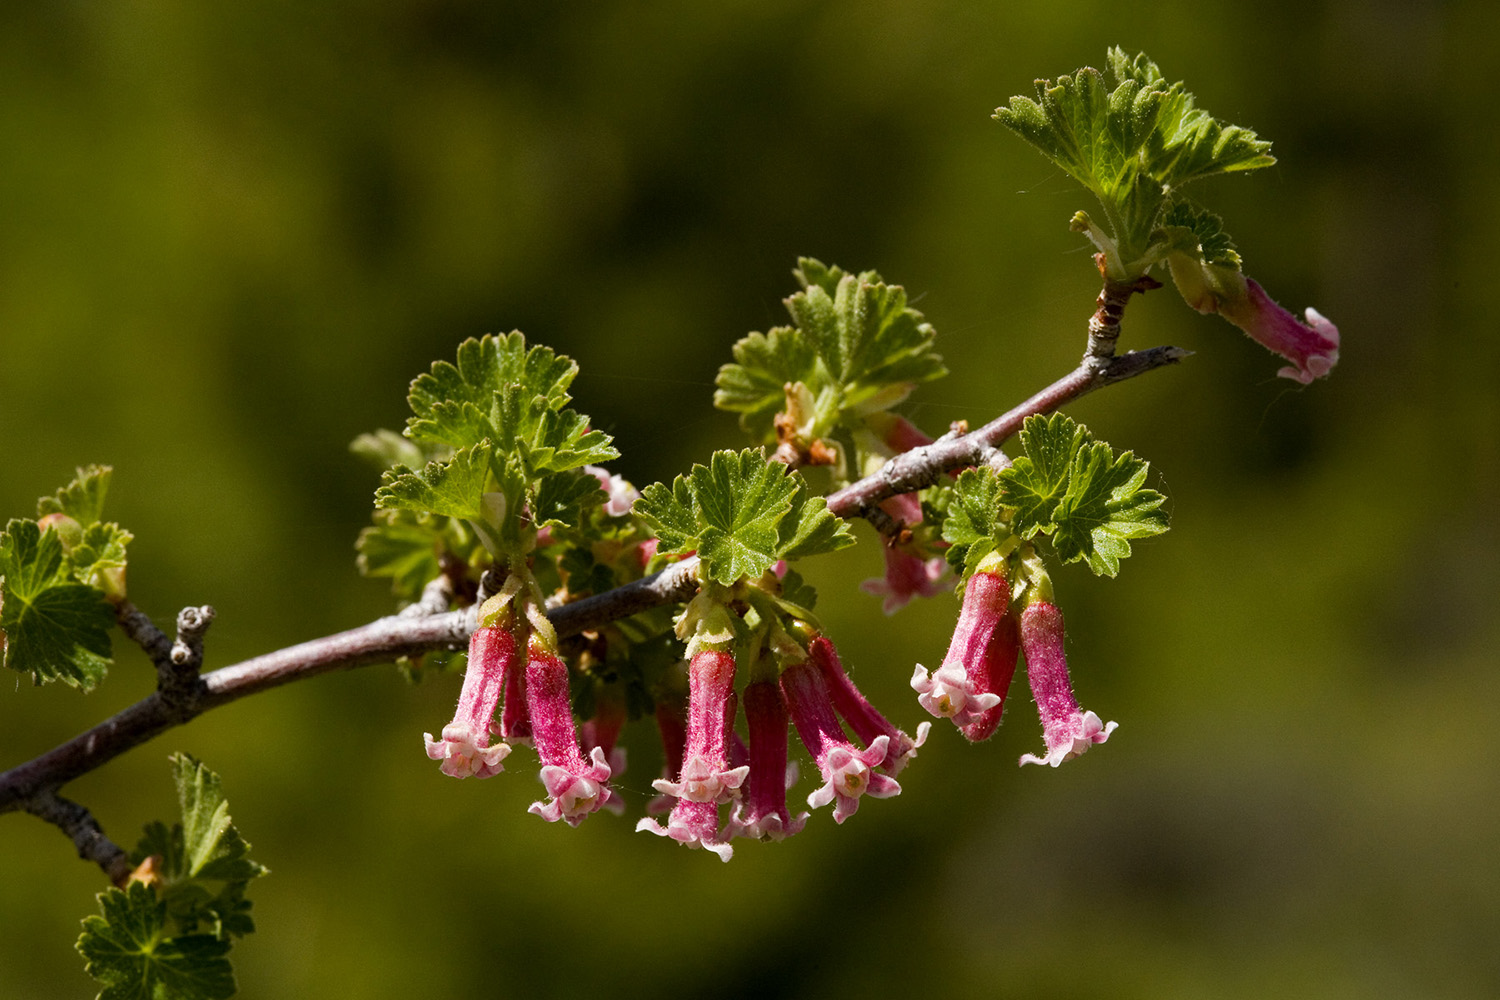 Bright pink, tubular flowers growing downward from a twig. Foliage somewhat crinkled.